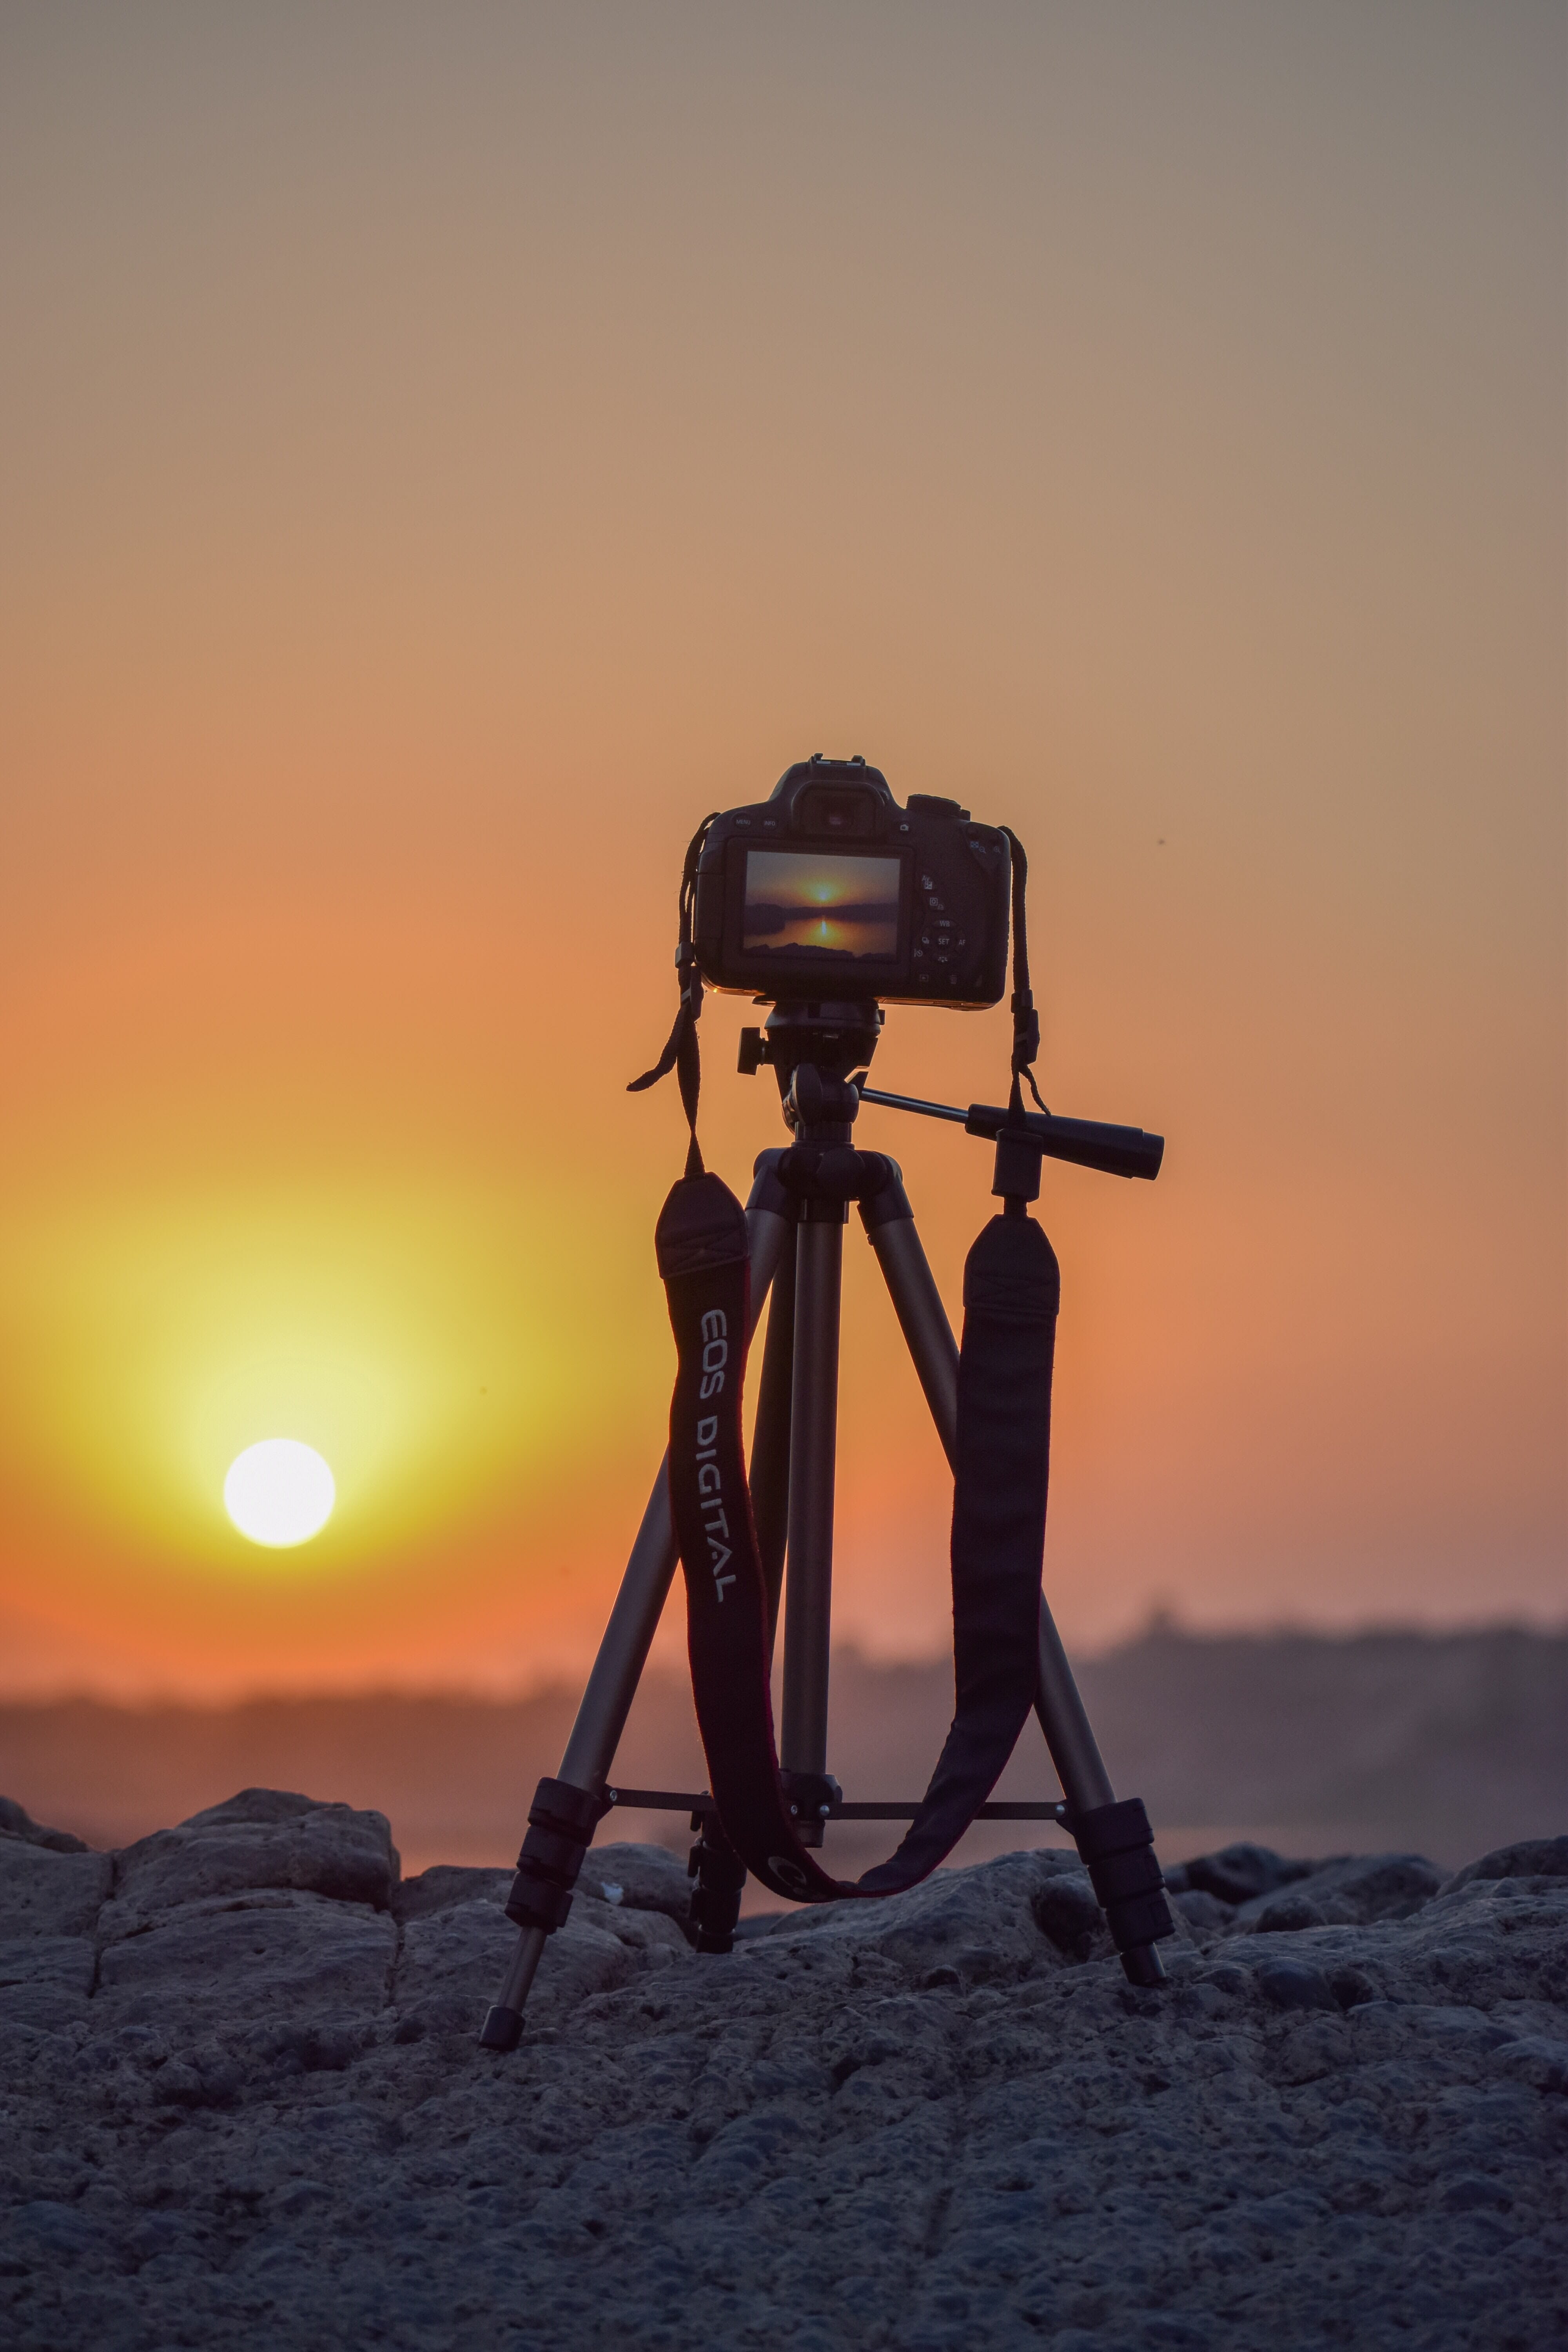 Tripod Vs Monopod: Which Option Is Right For You?